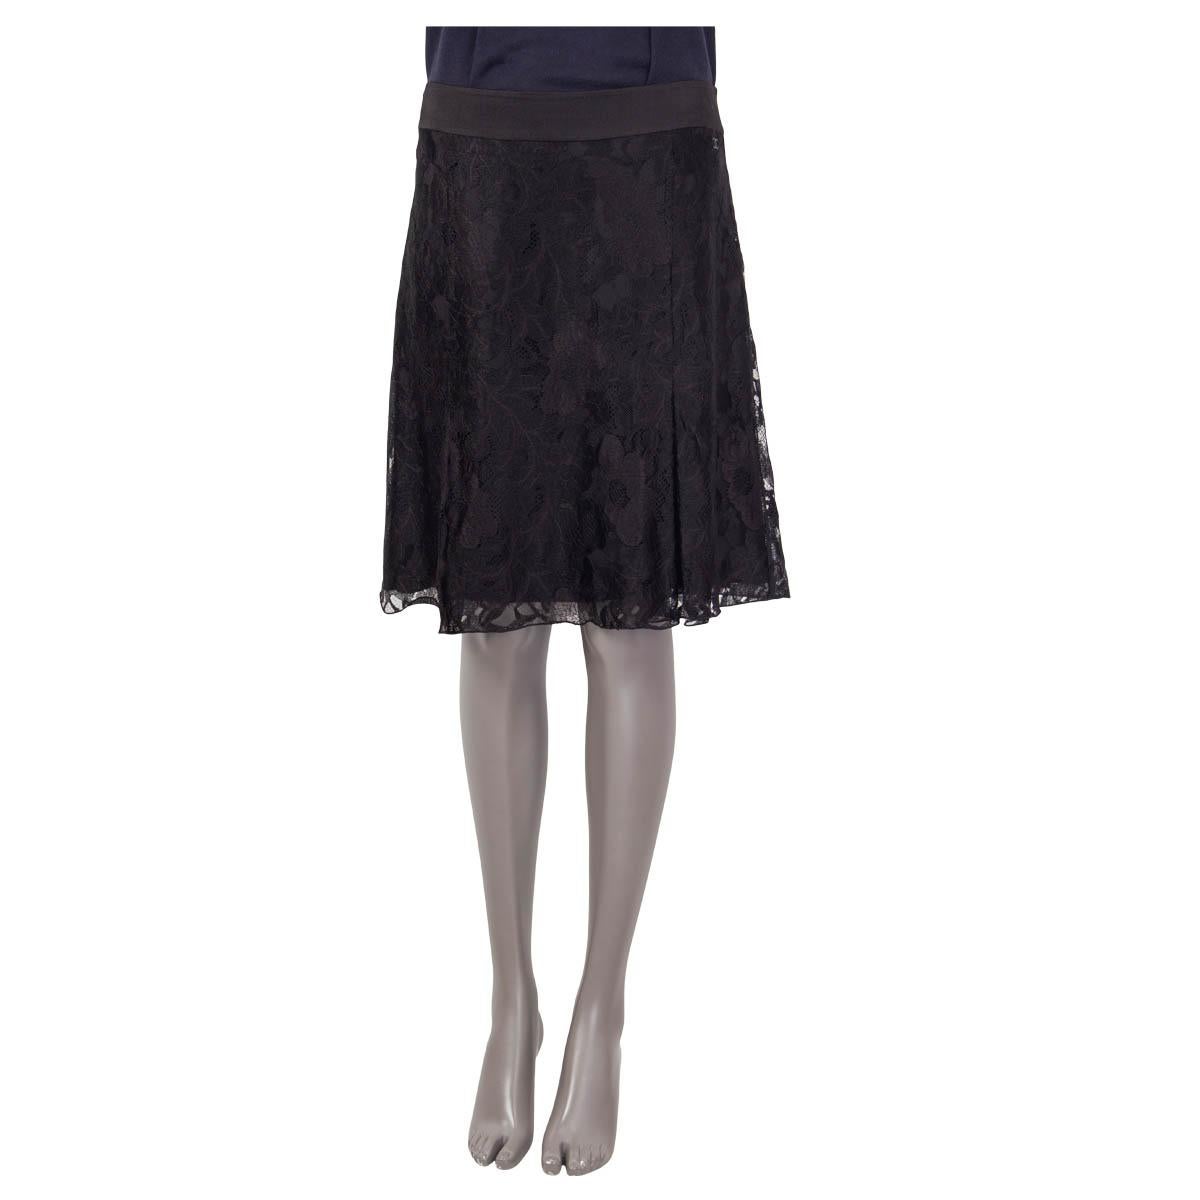 100% authentic Chanel box pleat lace skirt in black viscose (60%) and nylon (40%). Features a black 'CC' logo on the front. Opens with a concealed zipper and a hook on the back. Lined in black silk (100%). Has been worn and is in excellent